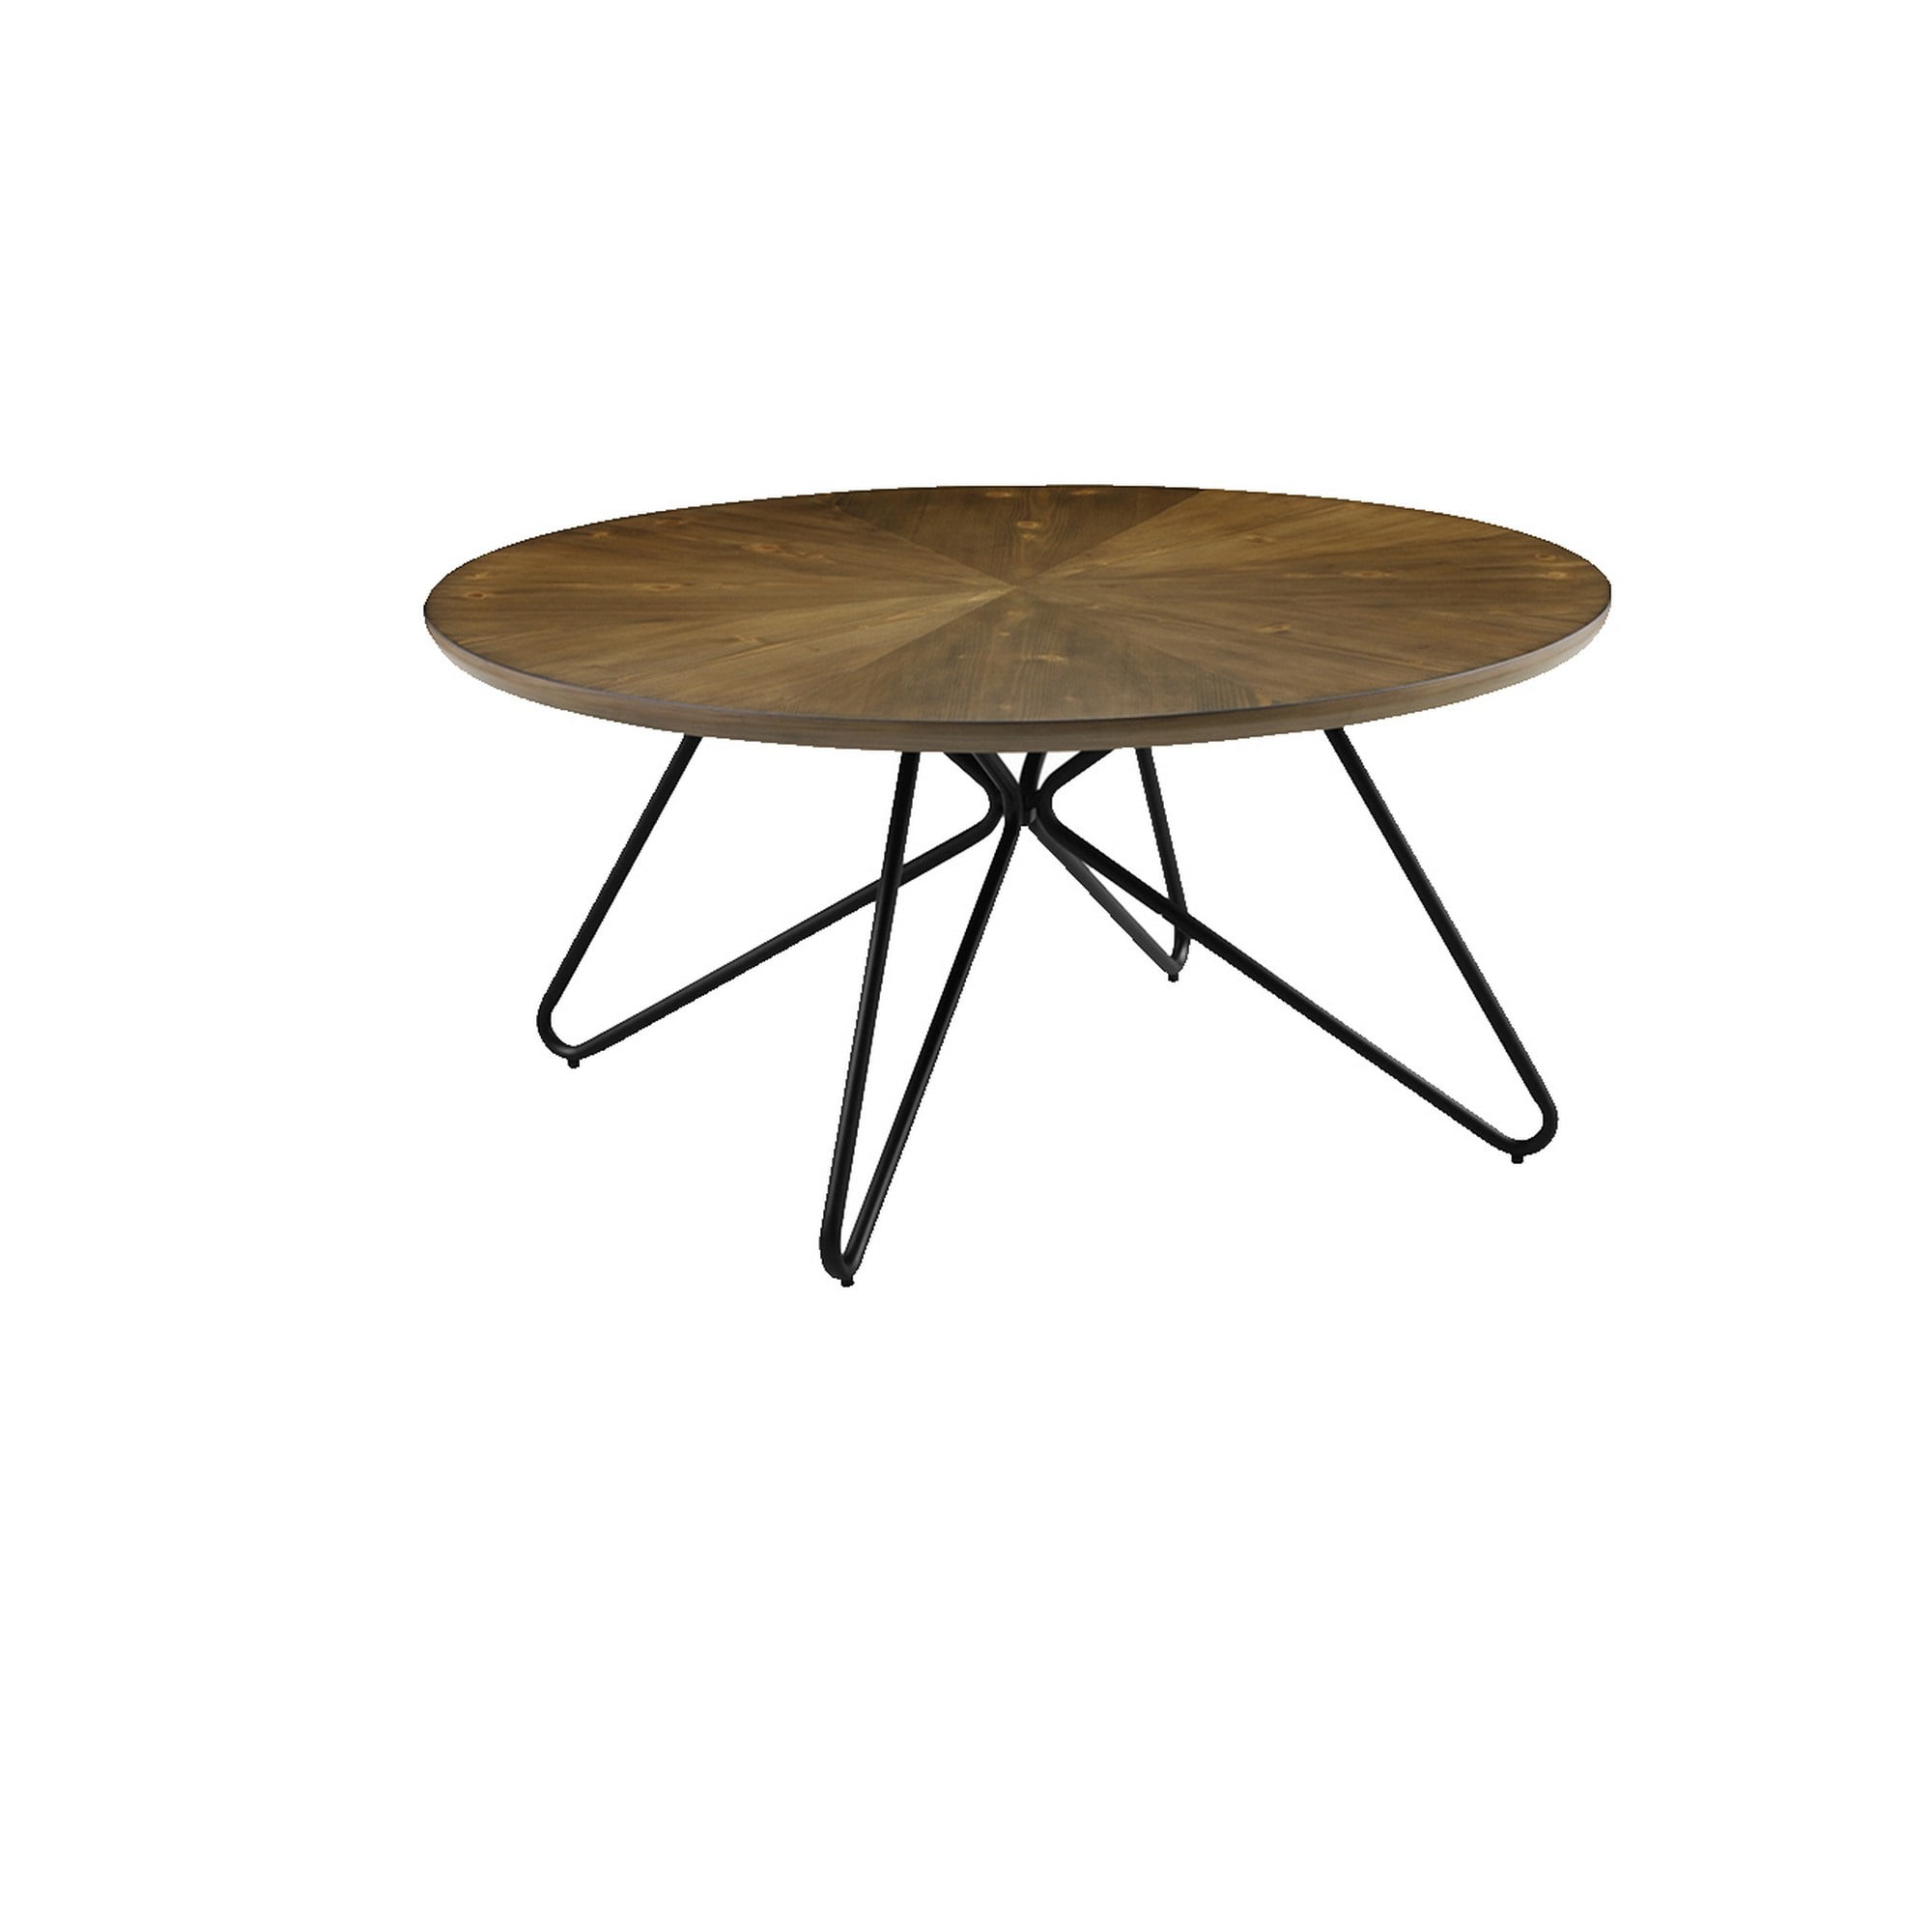 Round Coffee Table Tea Table Wooden Tabletop with Hairpin Metal Legs Living Room